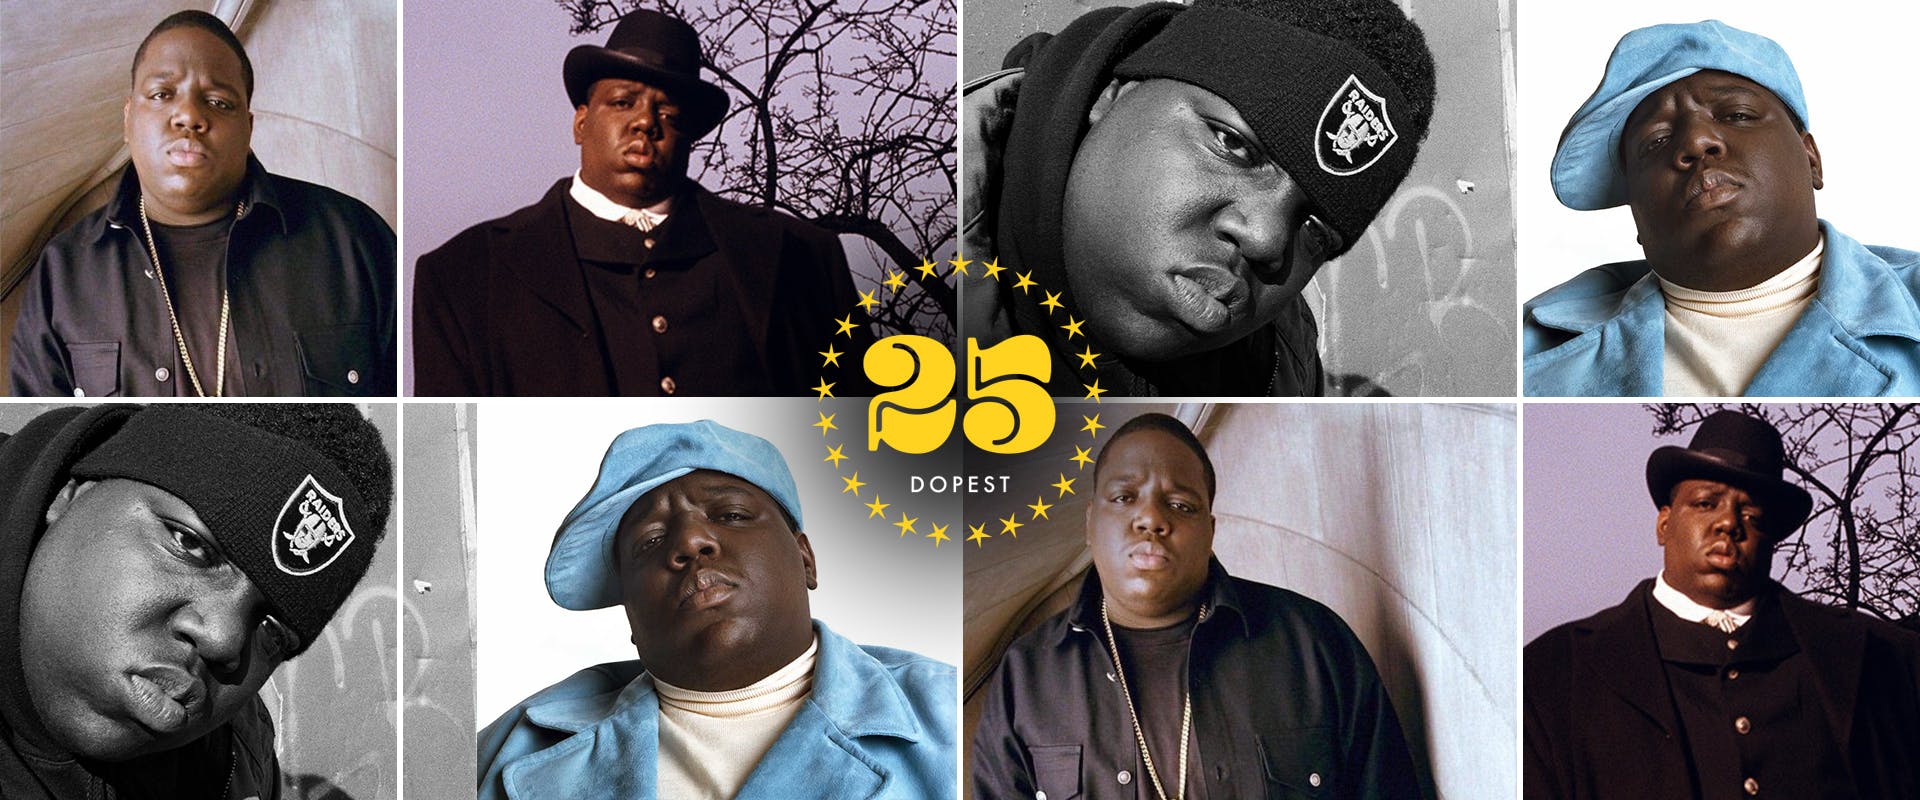 The Notorious B.I.G., Songs, Albums, & Death